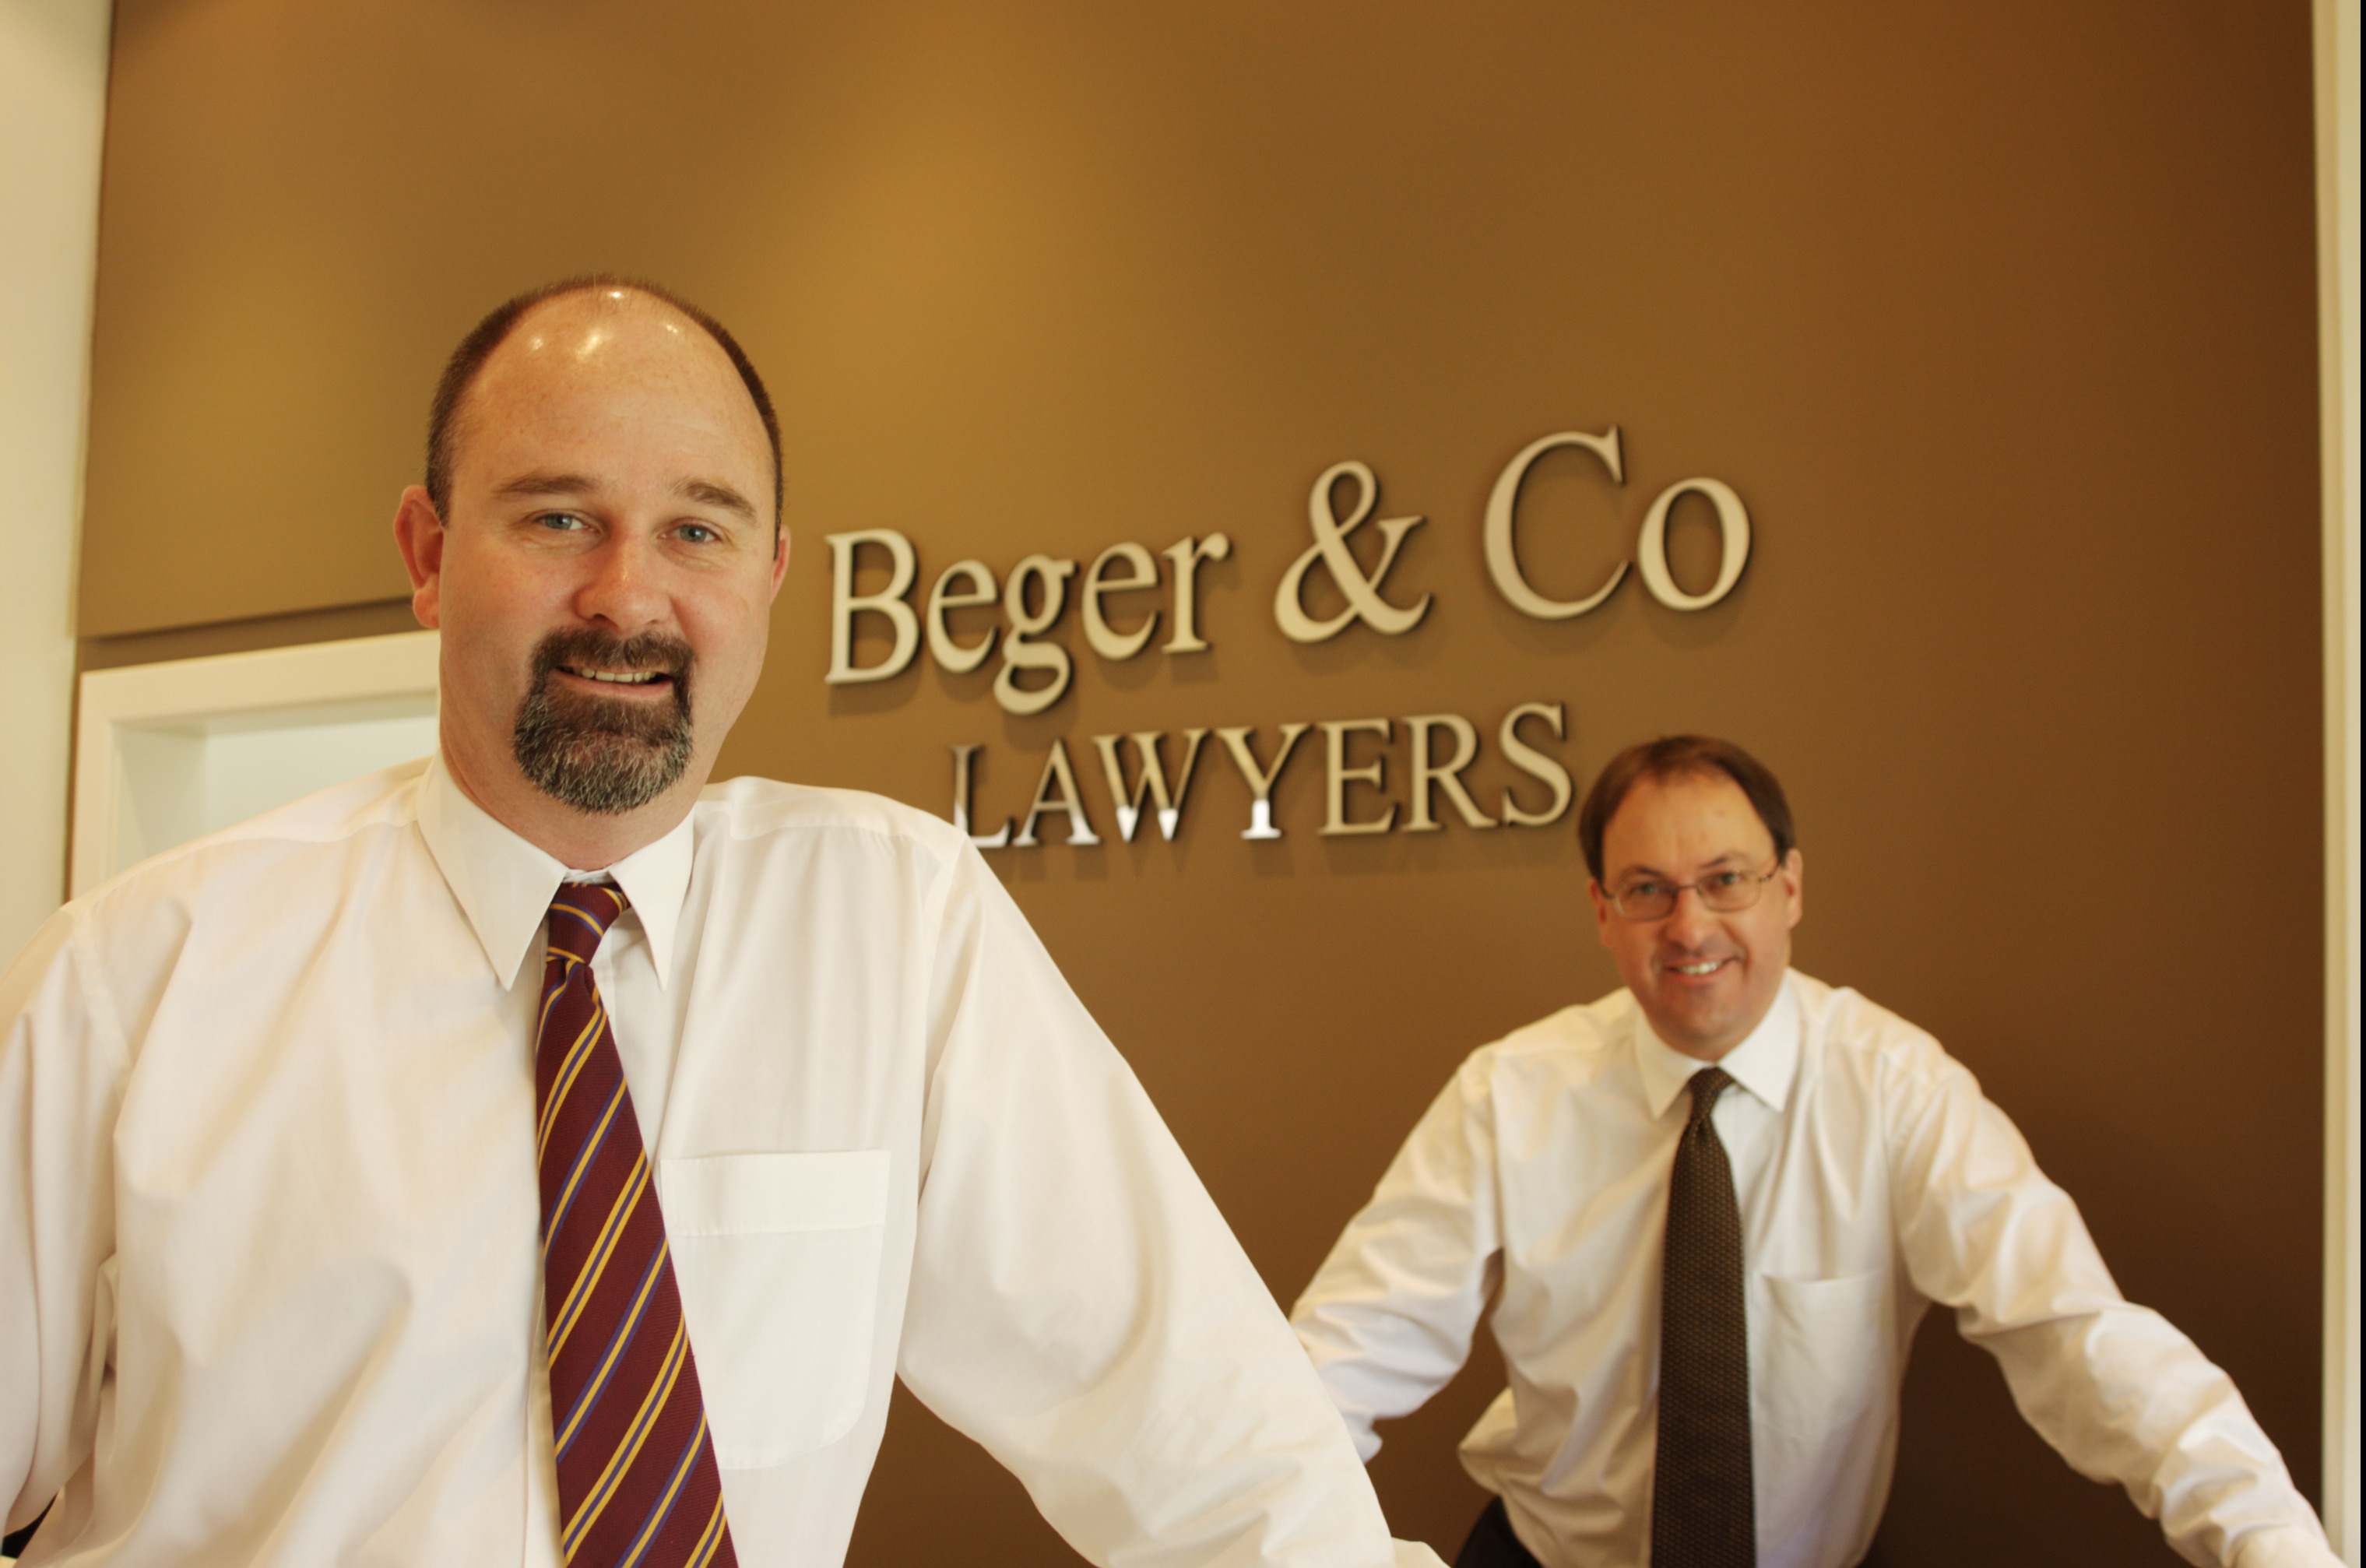 Beger & Co Lawyers